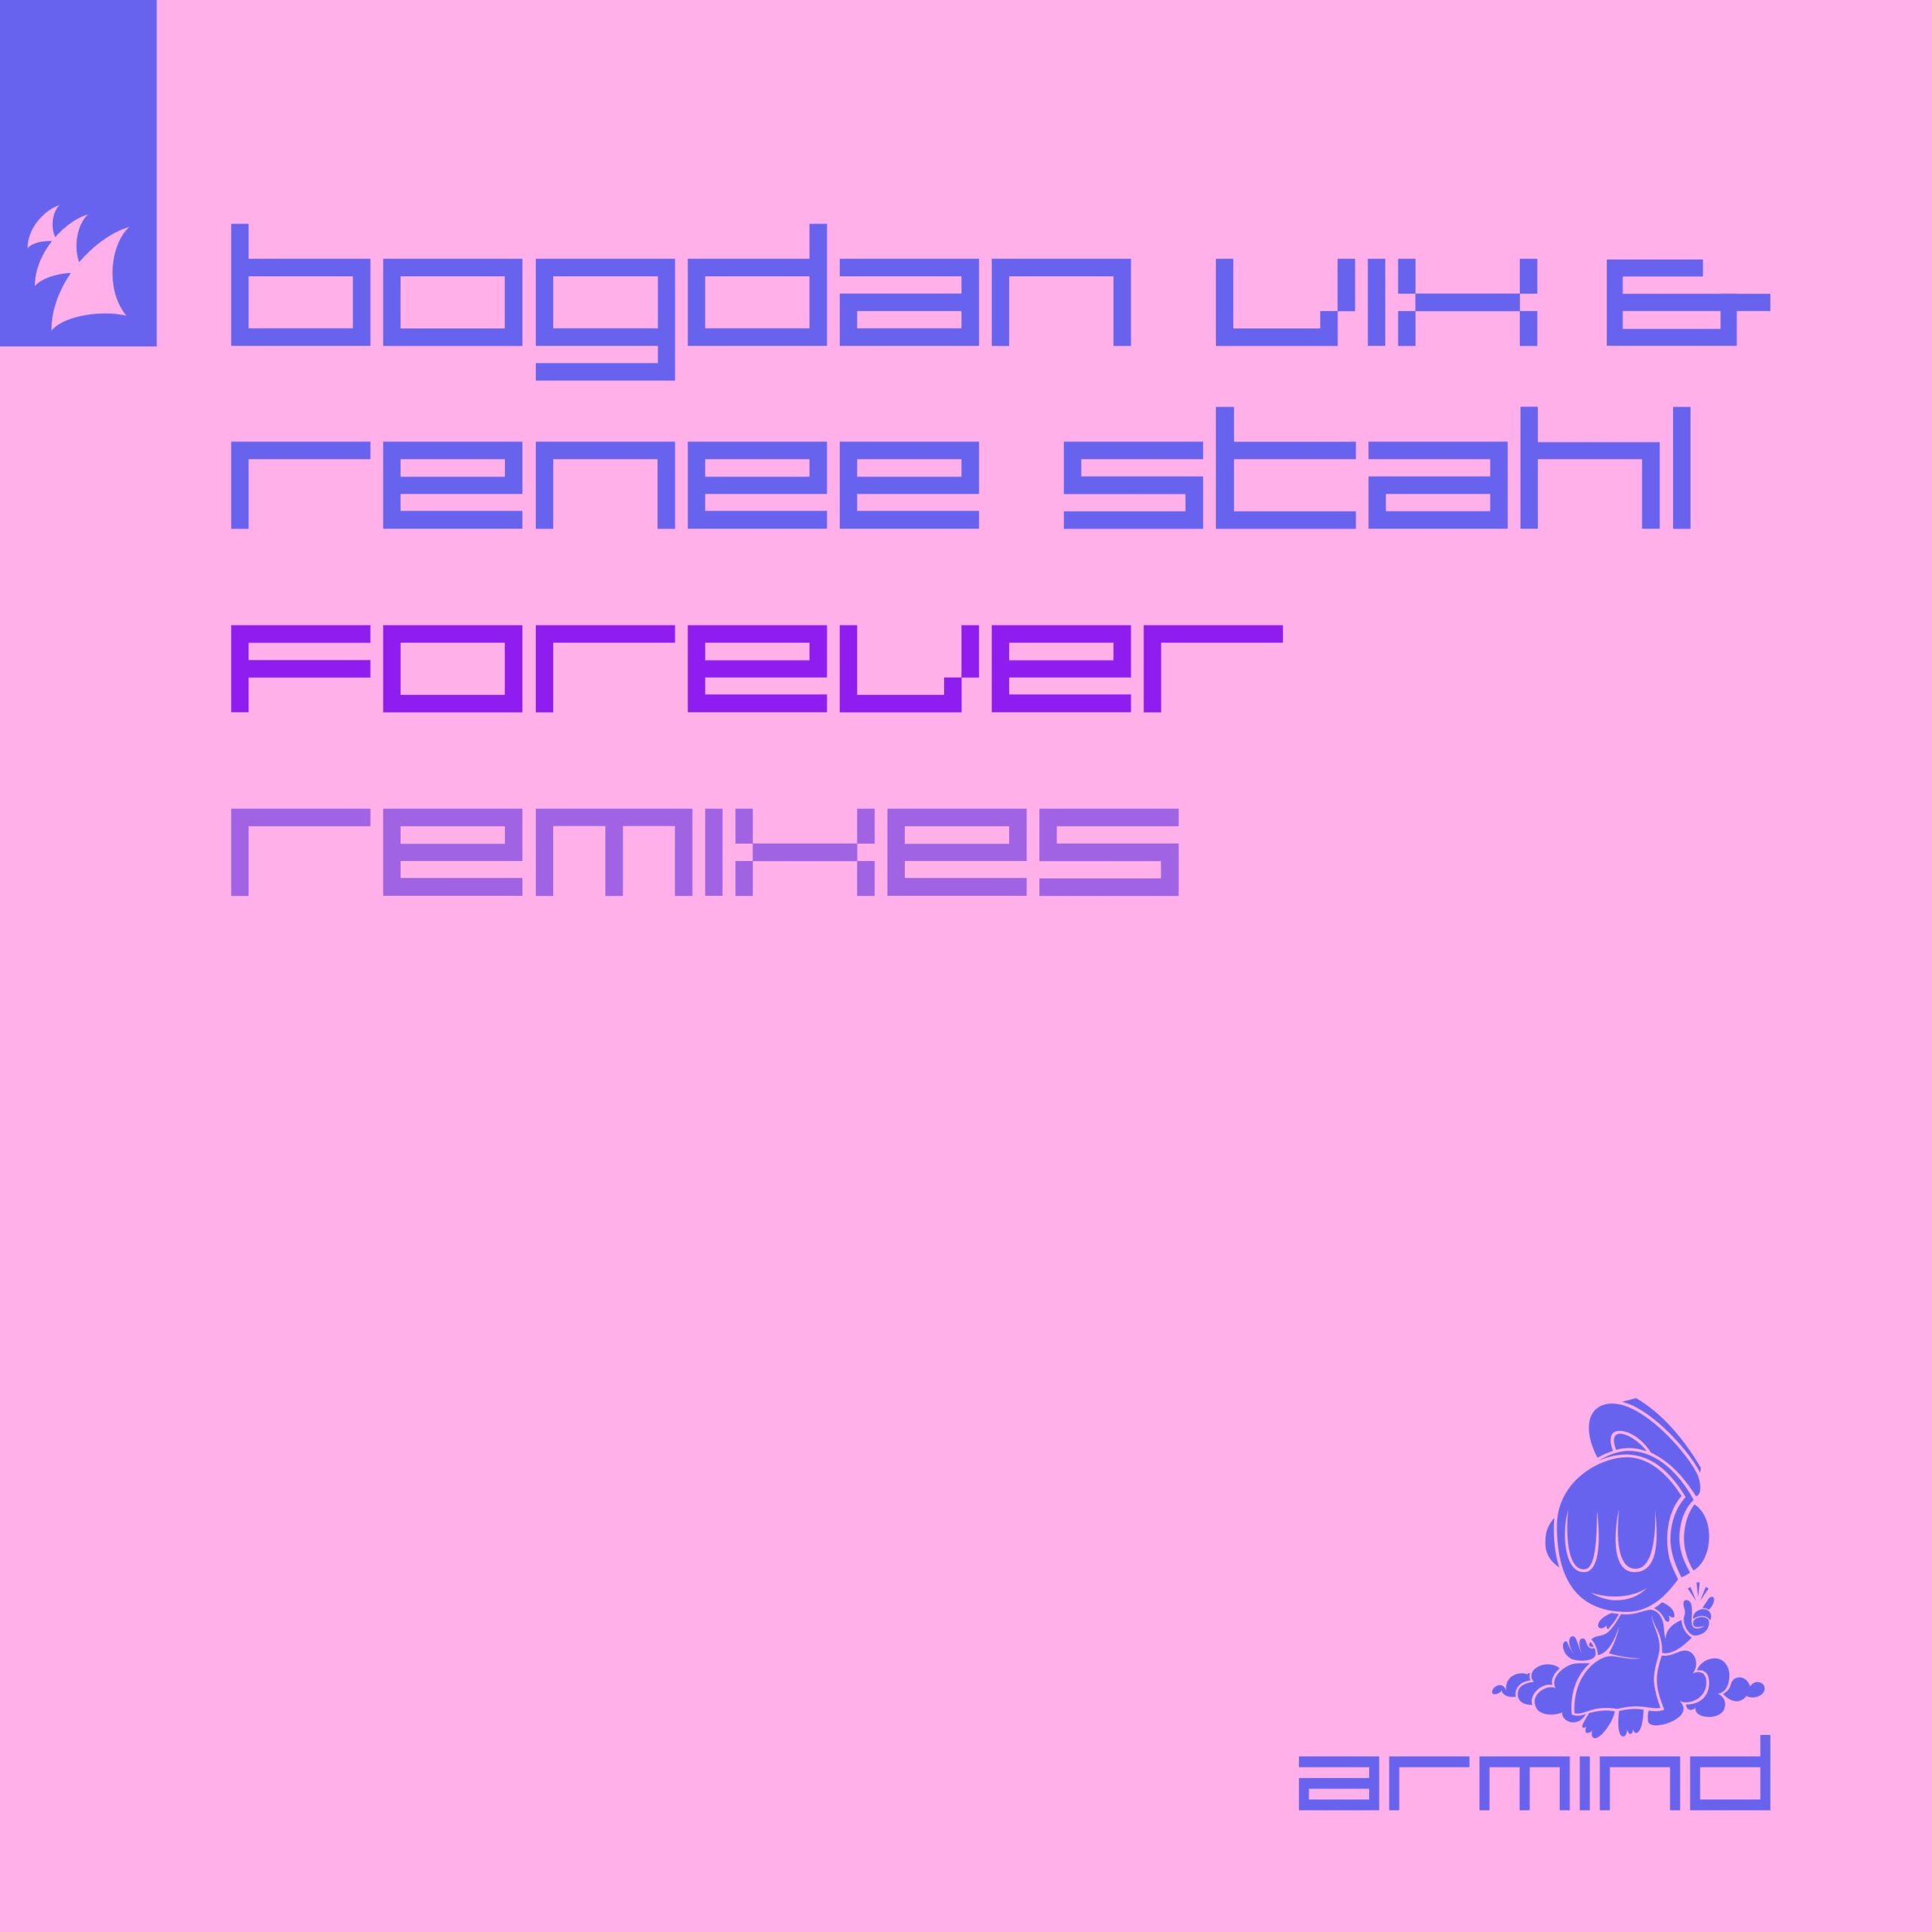 Bogdan Vix and Renee Stahl presents Forever (Remixes) on Armind